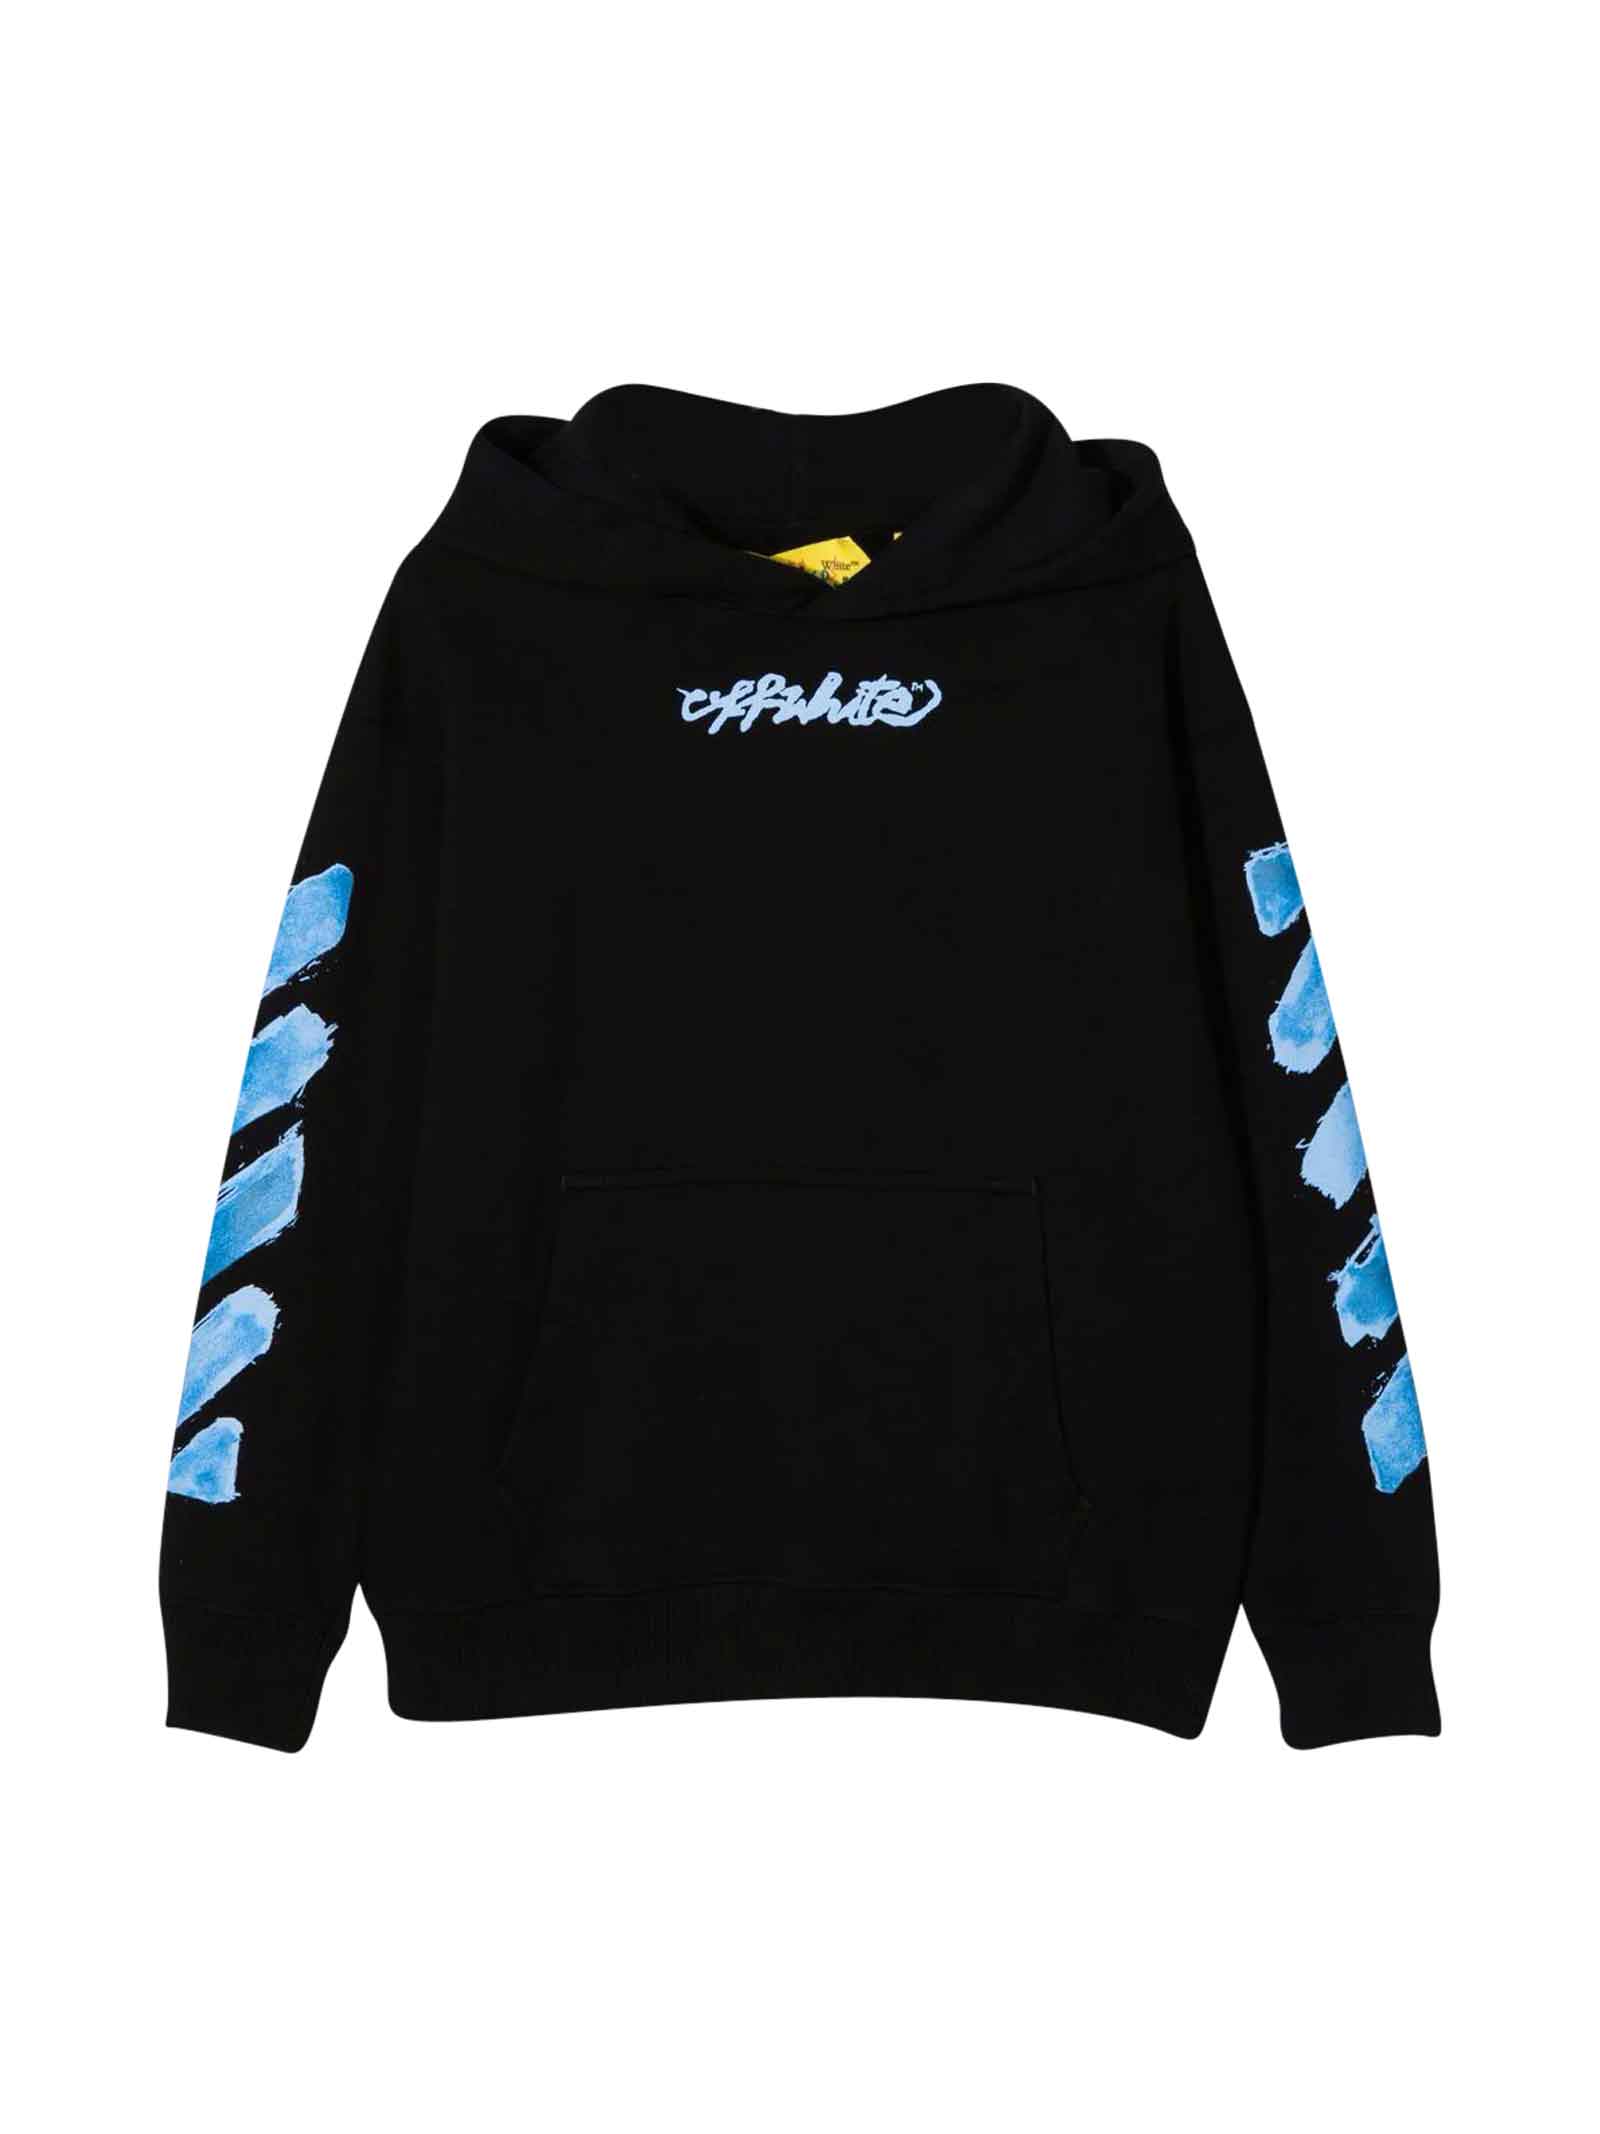 Off-White Black Sweatshirt With Hood And Light Blue Print Off White Kids